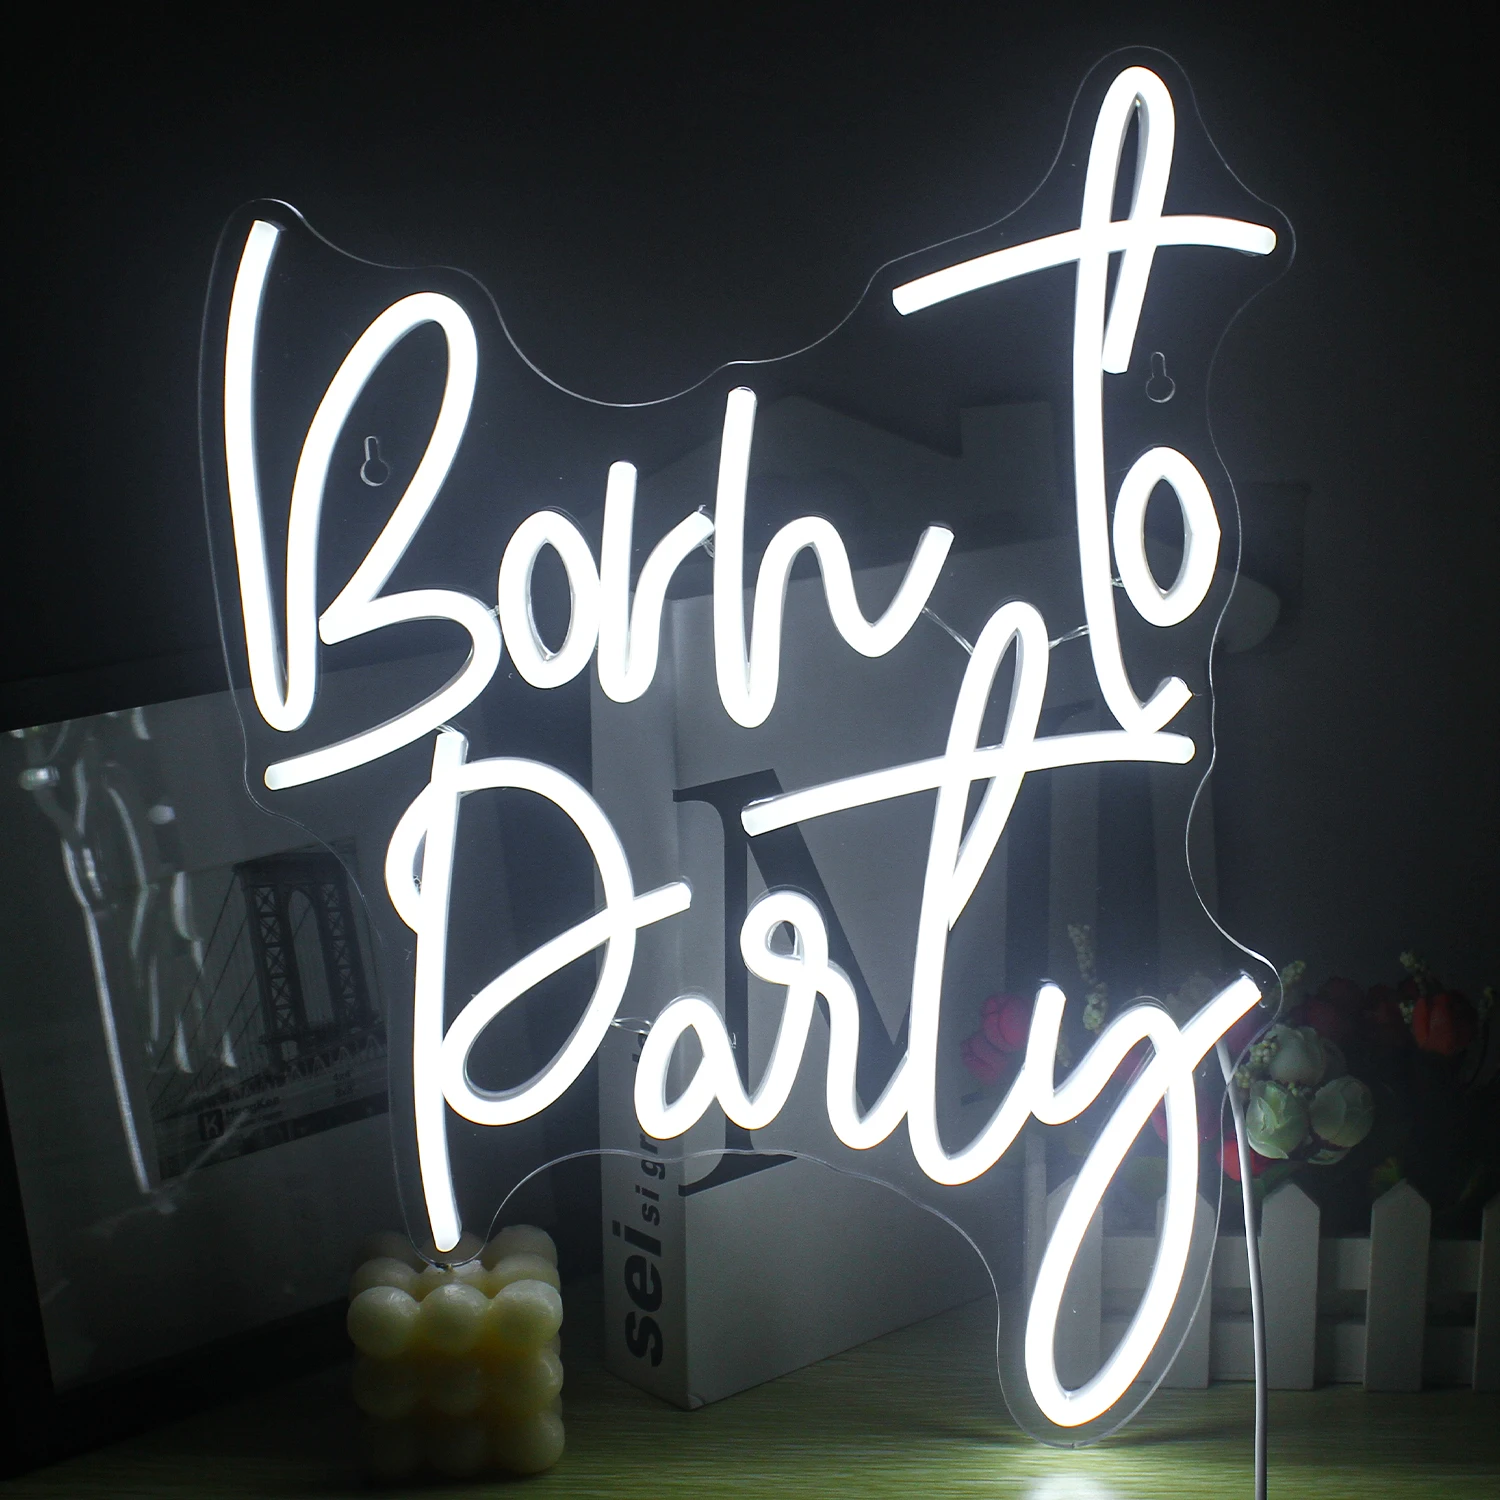 

Wanxing Borh to Party Neon Sign Custom Light LED Transparent Wedding Bar Room Club Bedroom Atmosphere Wall Decor Gift